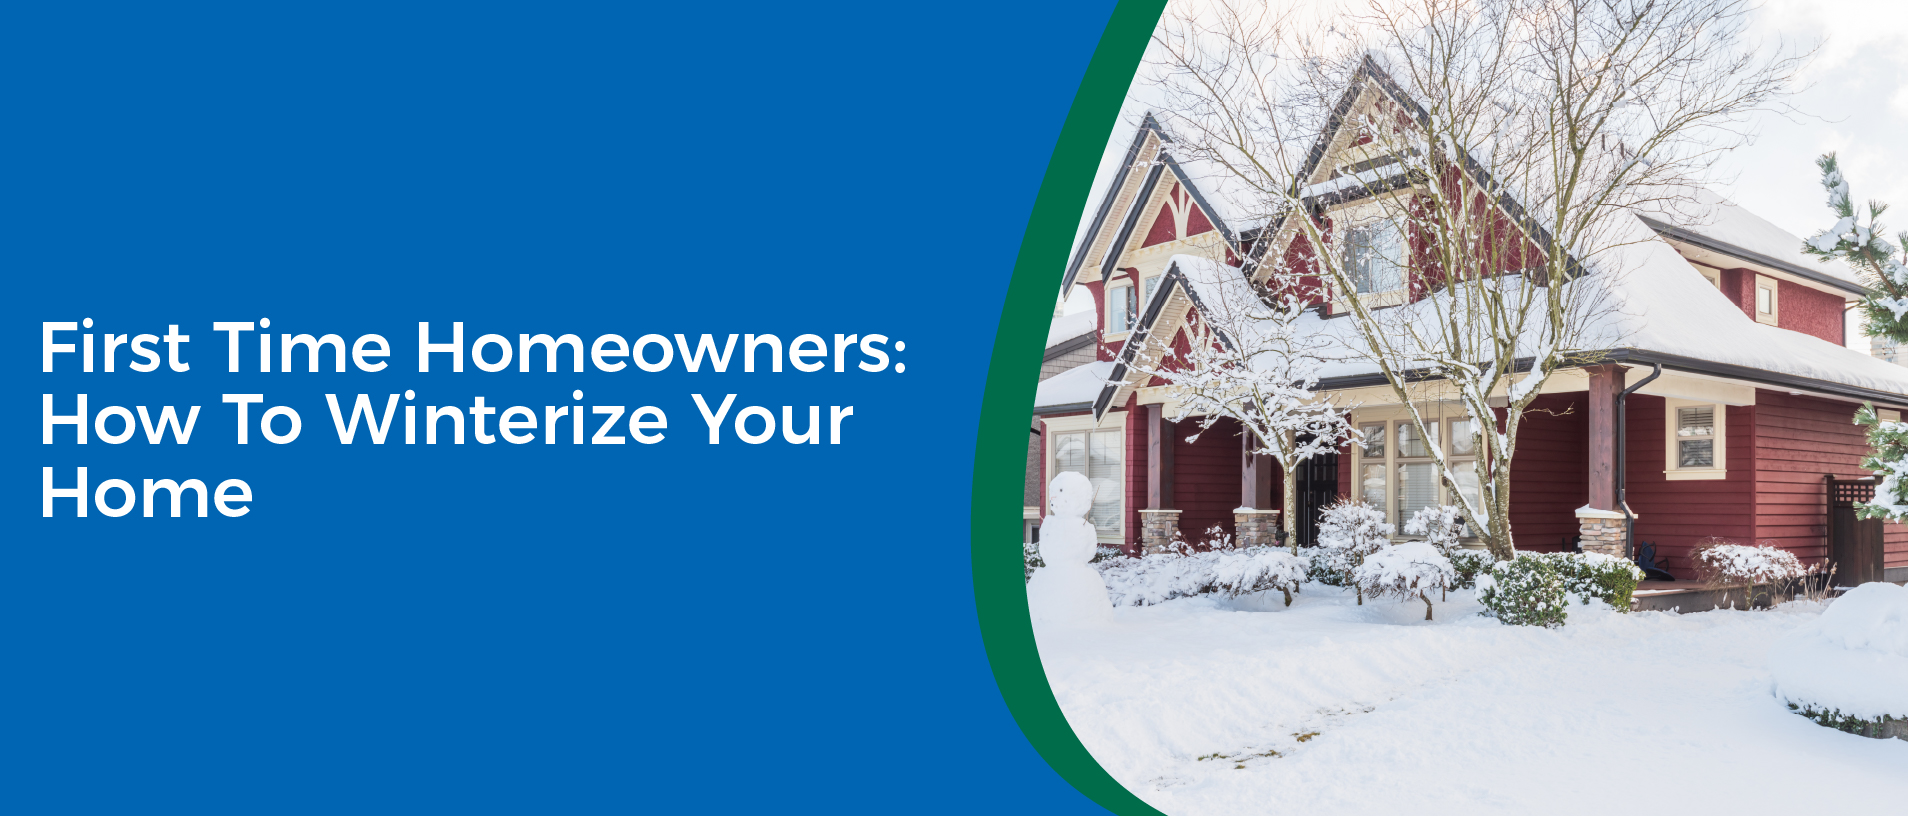 First Time Homeowners: How To Winterize Your Home - Image of a house covered in snow